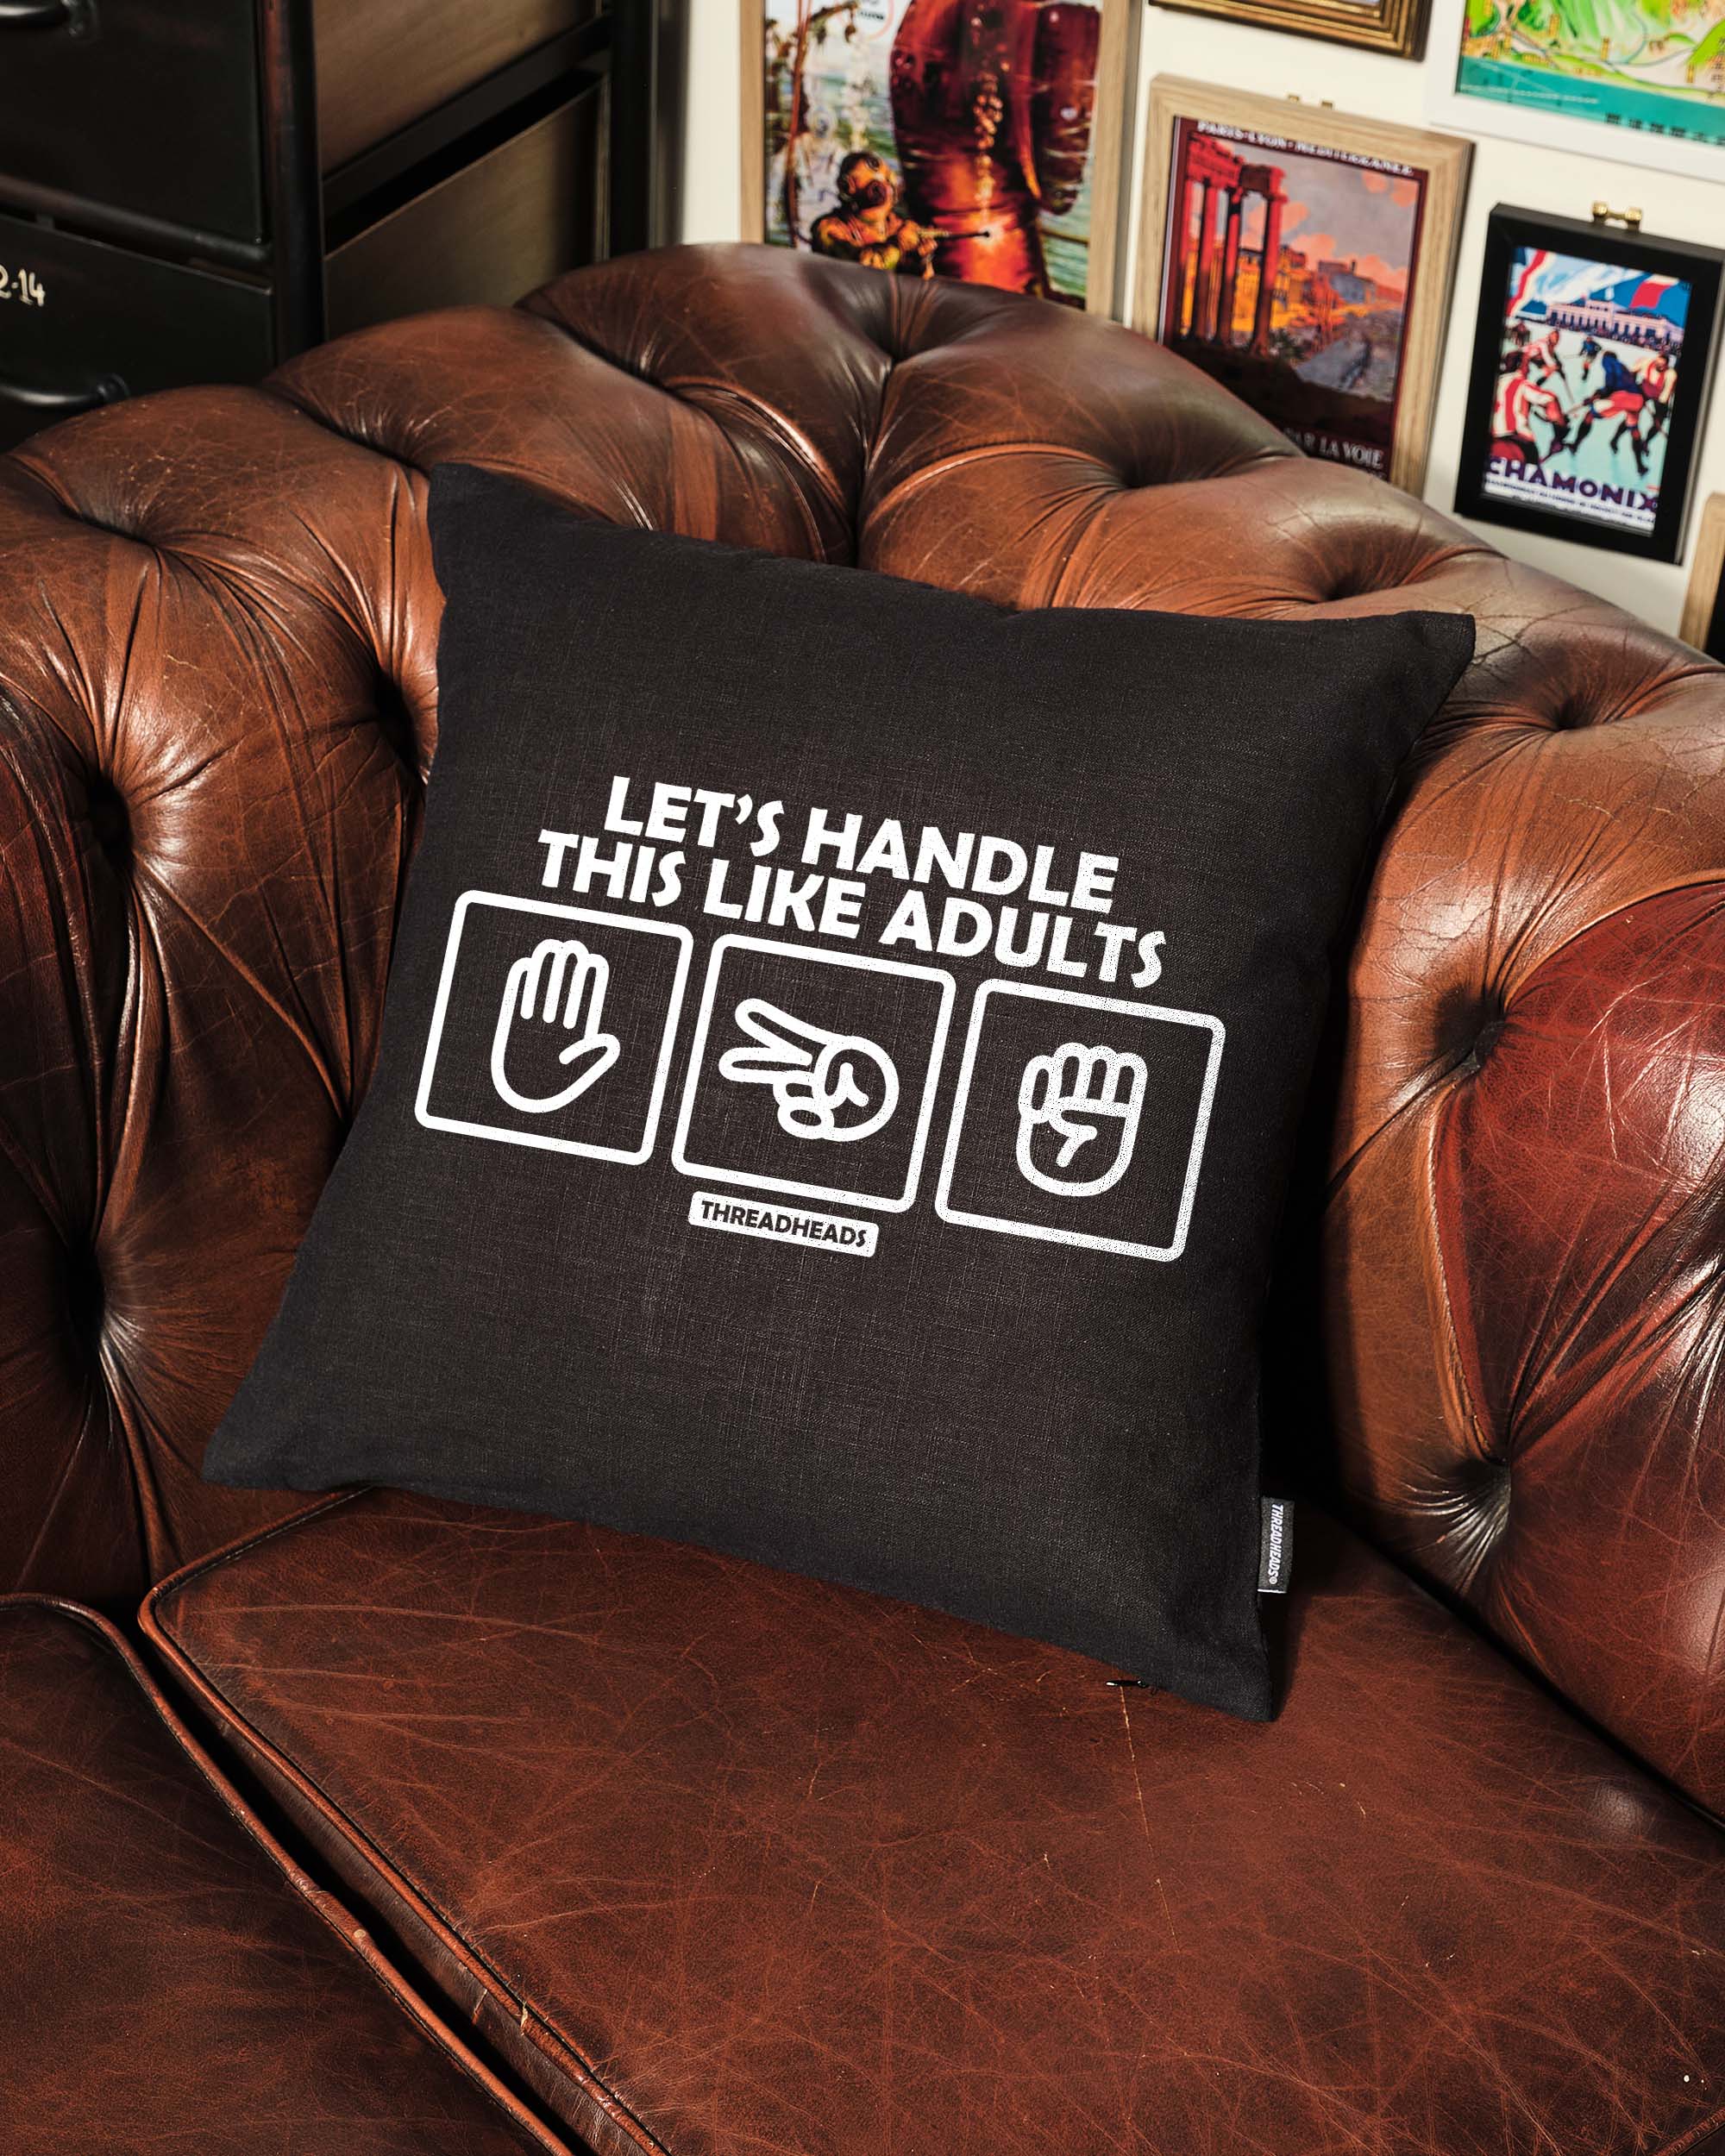 Let's Handle This Like Adults Cushion